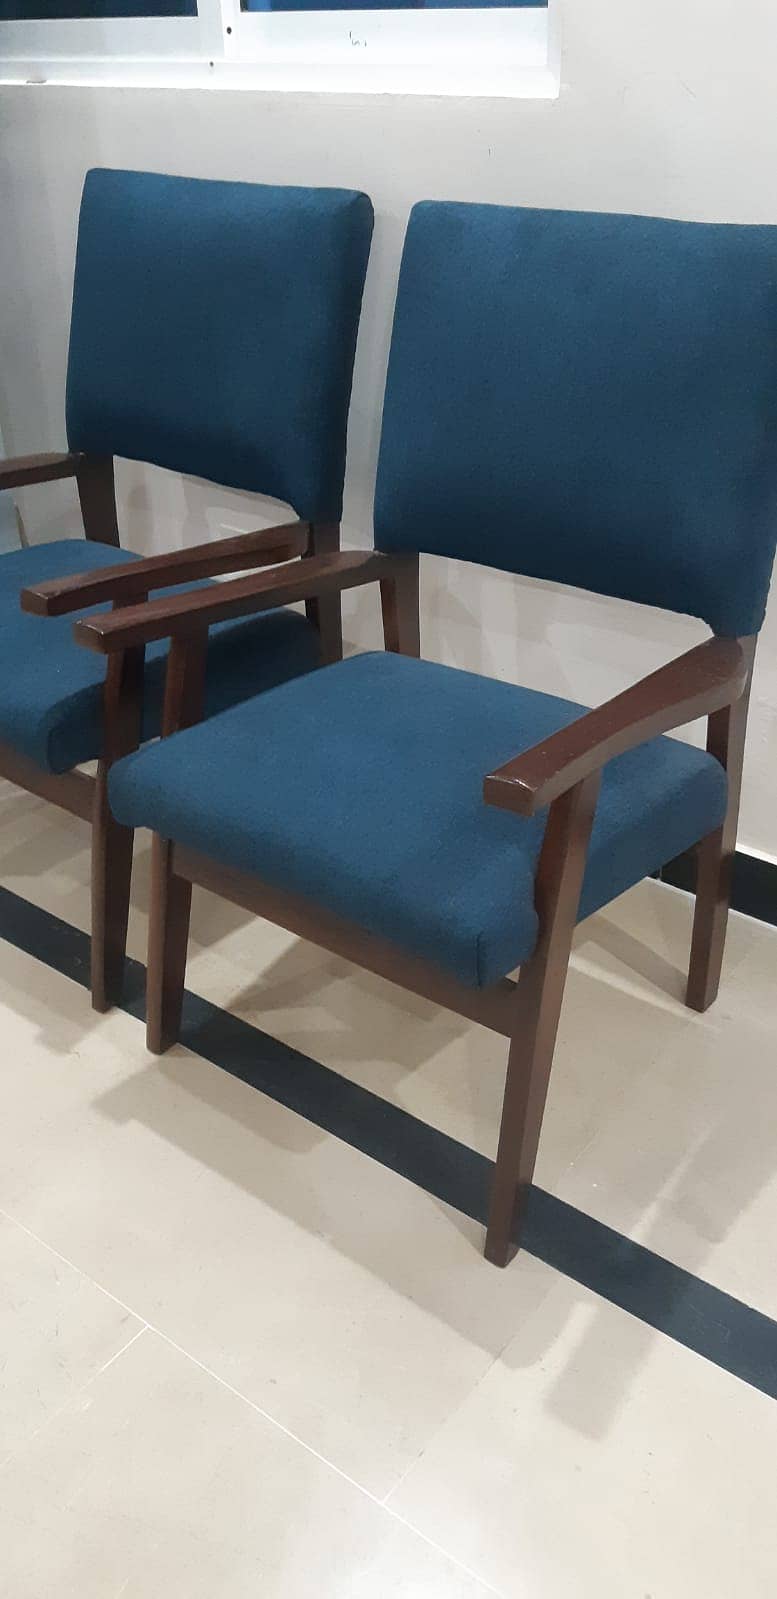 5 Room Chairs For Sale 0